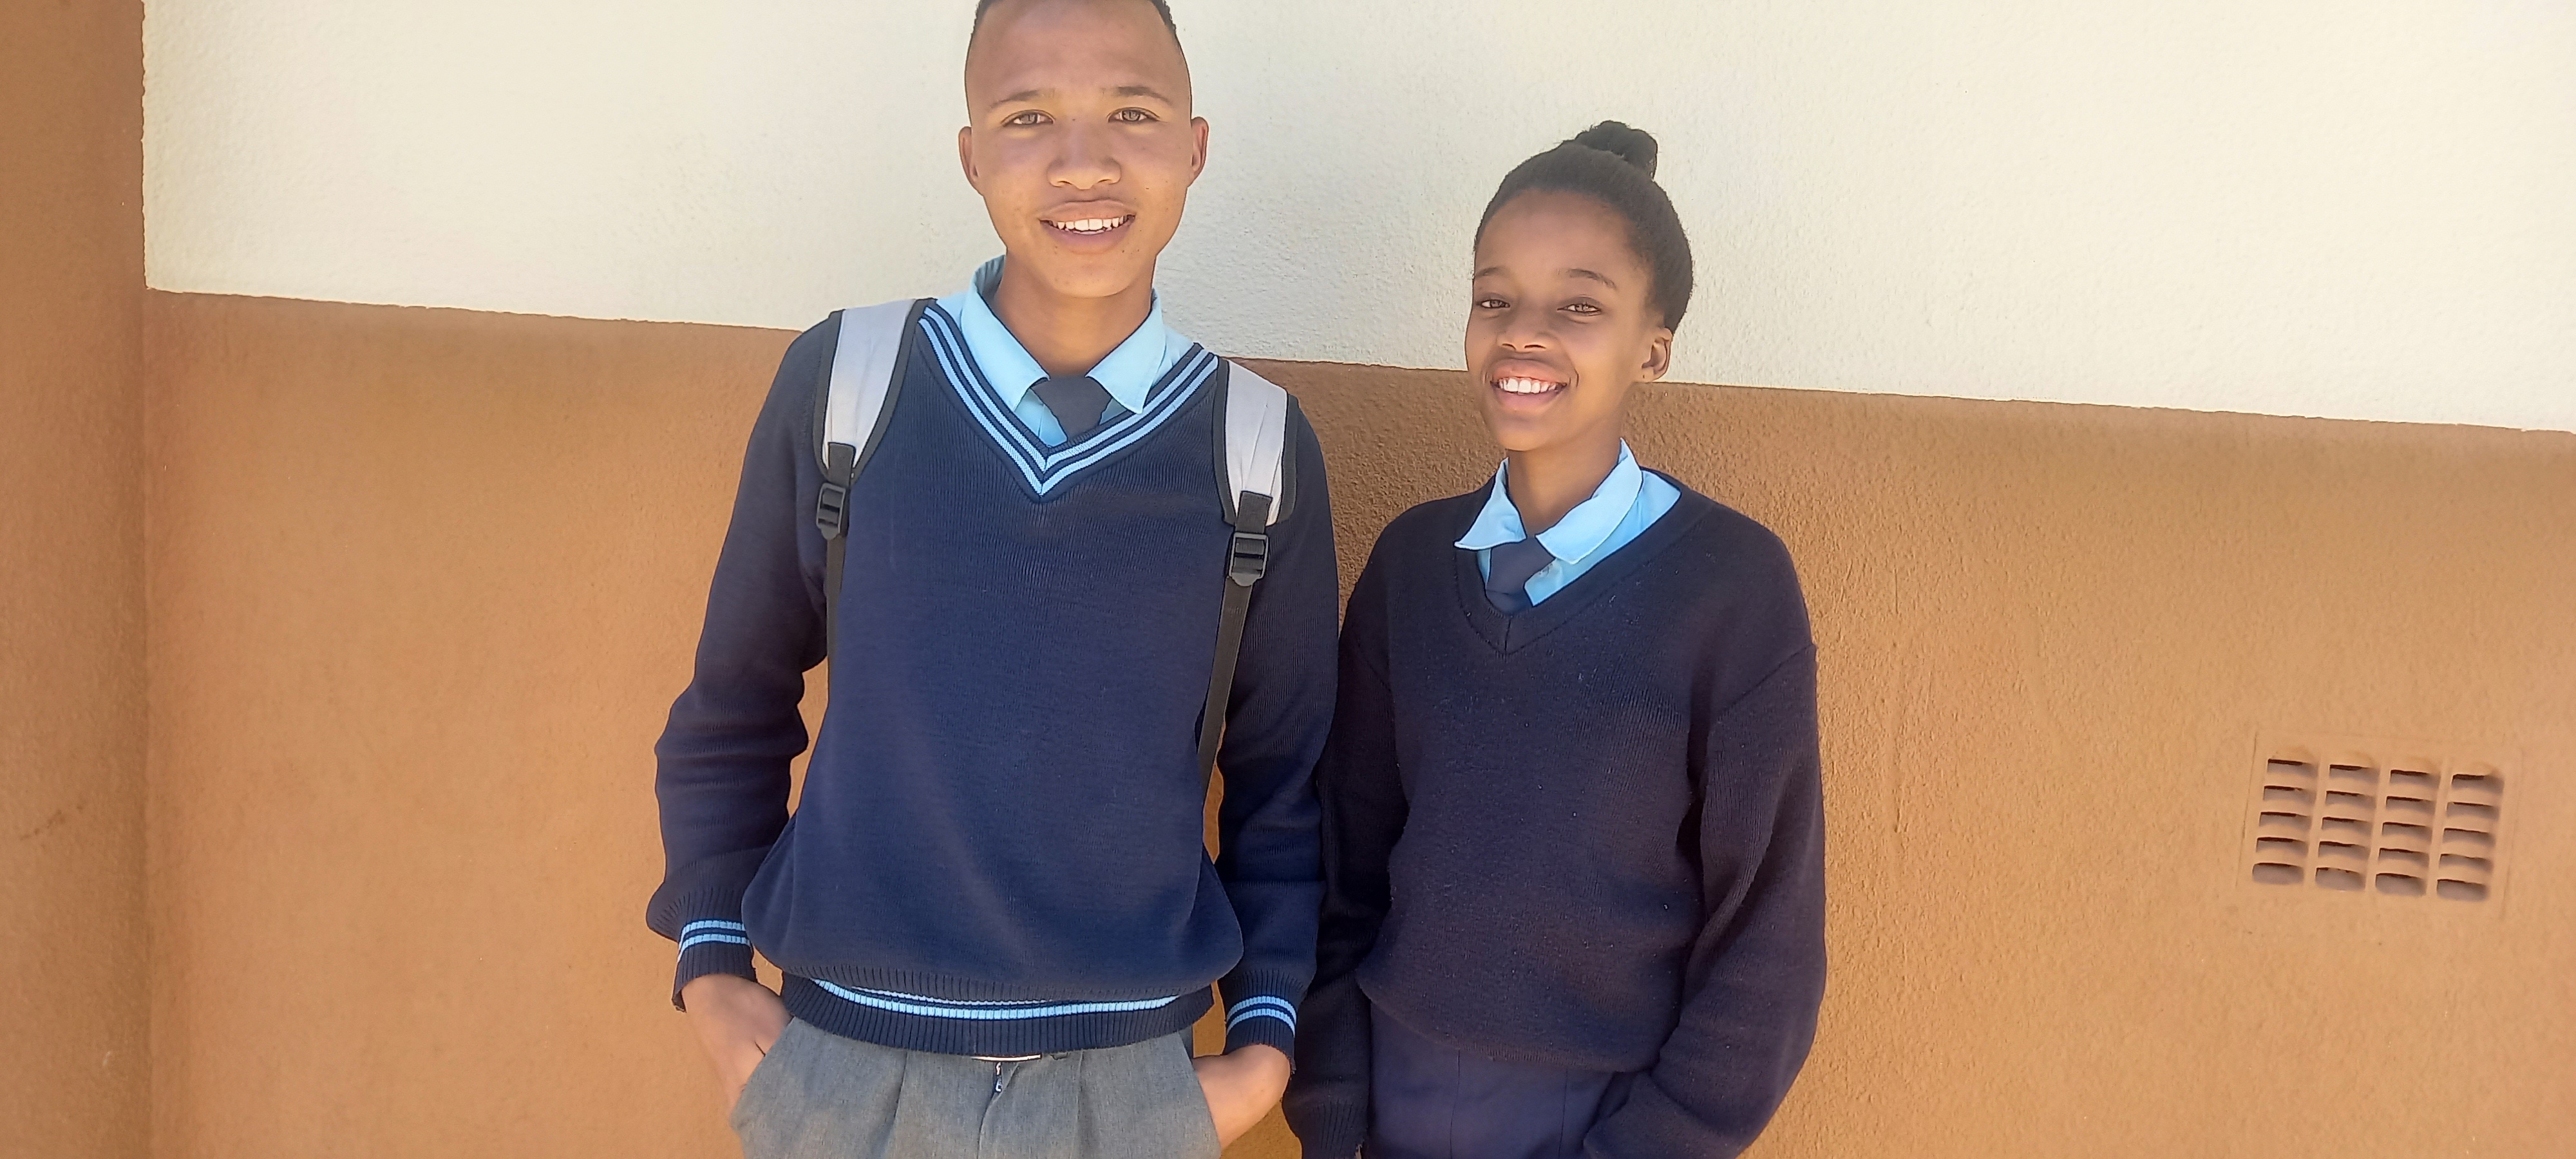 //Kharas prepares learners for future career paths